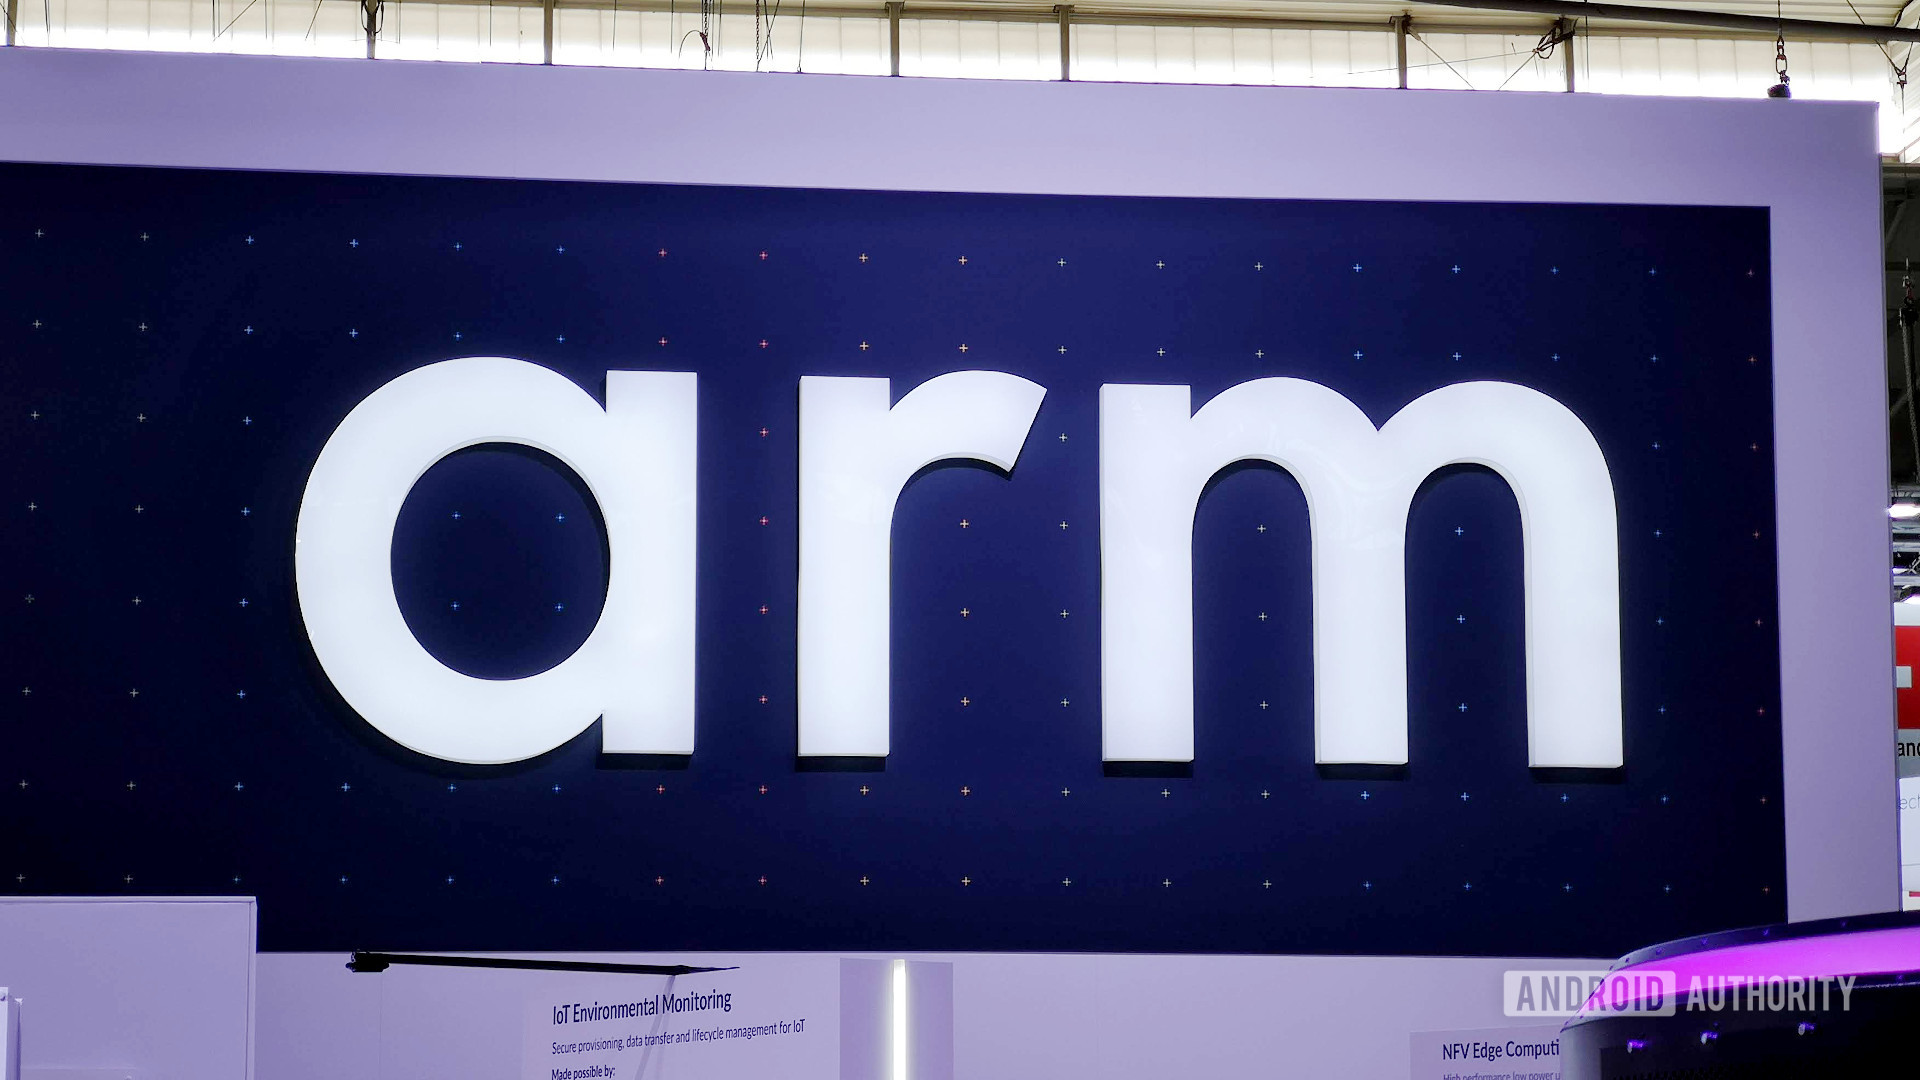 Arm booth logo from MWC 2019